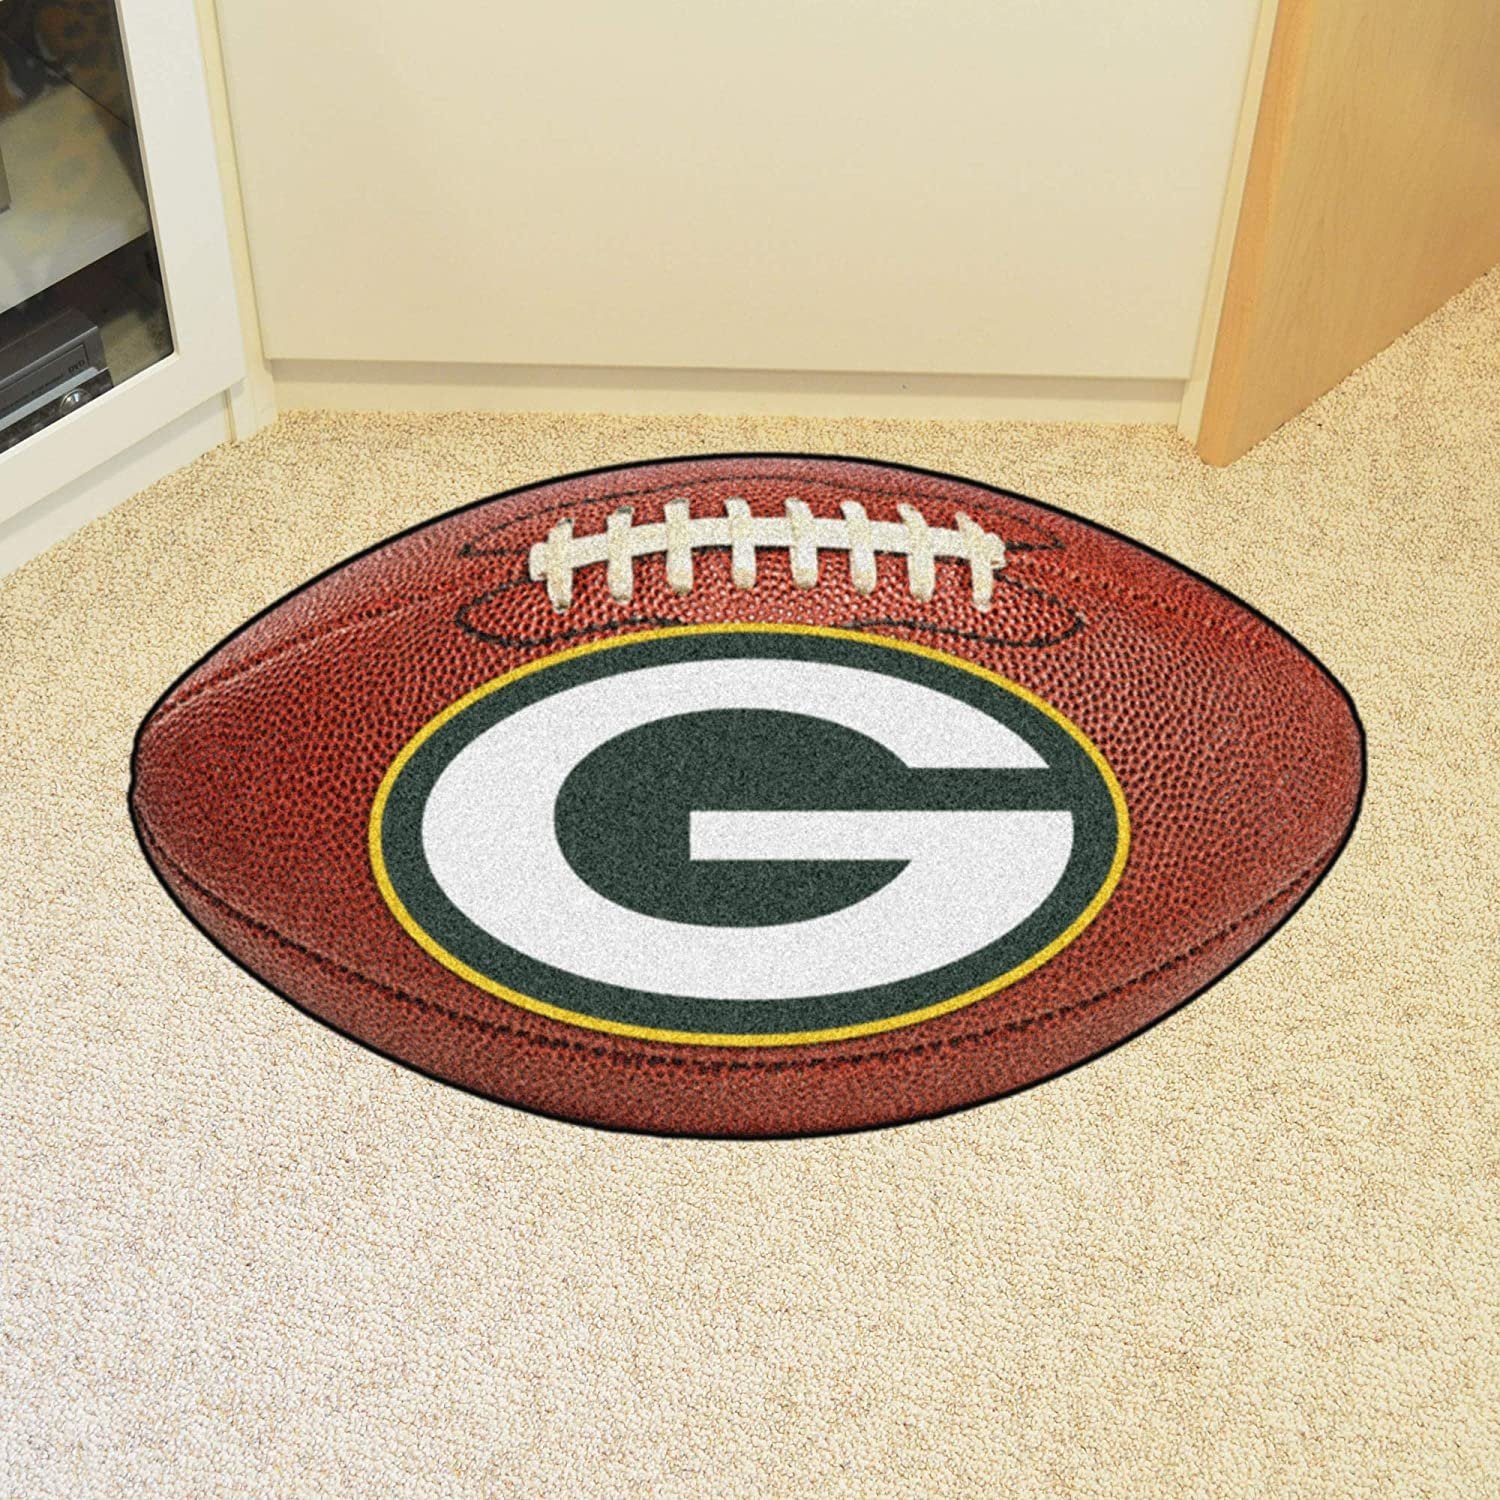 Green Bay Packers Floor Mat Area Rug, 20x32 Inch, Non-Skid Backing, Football Design